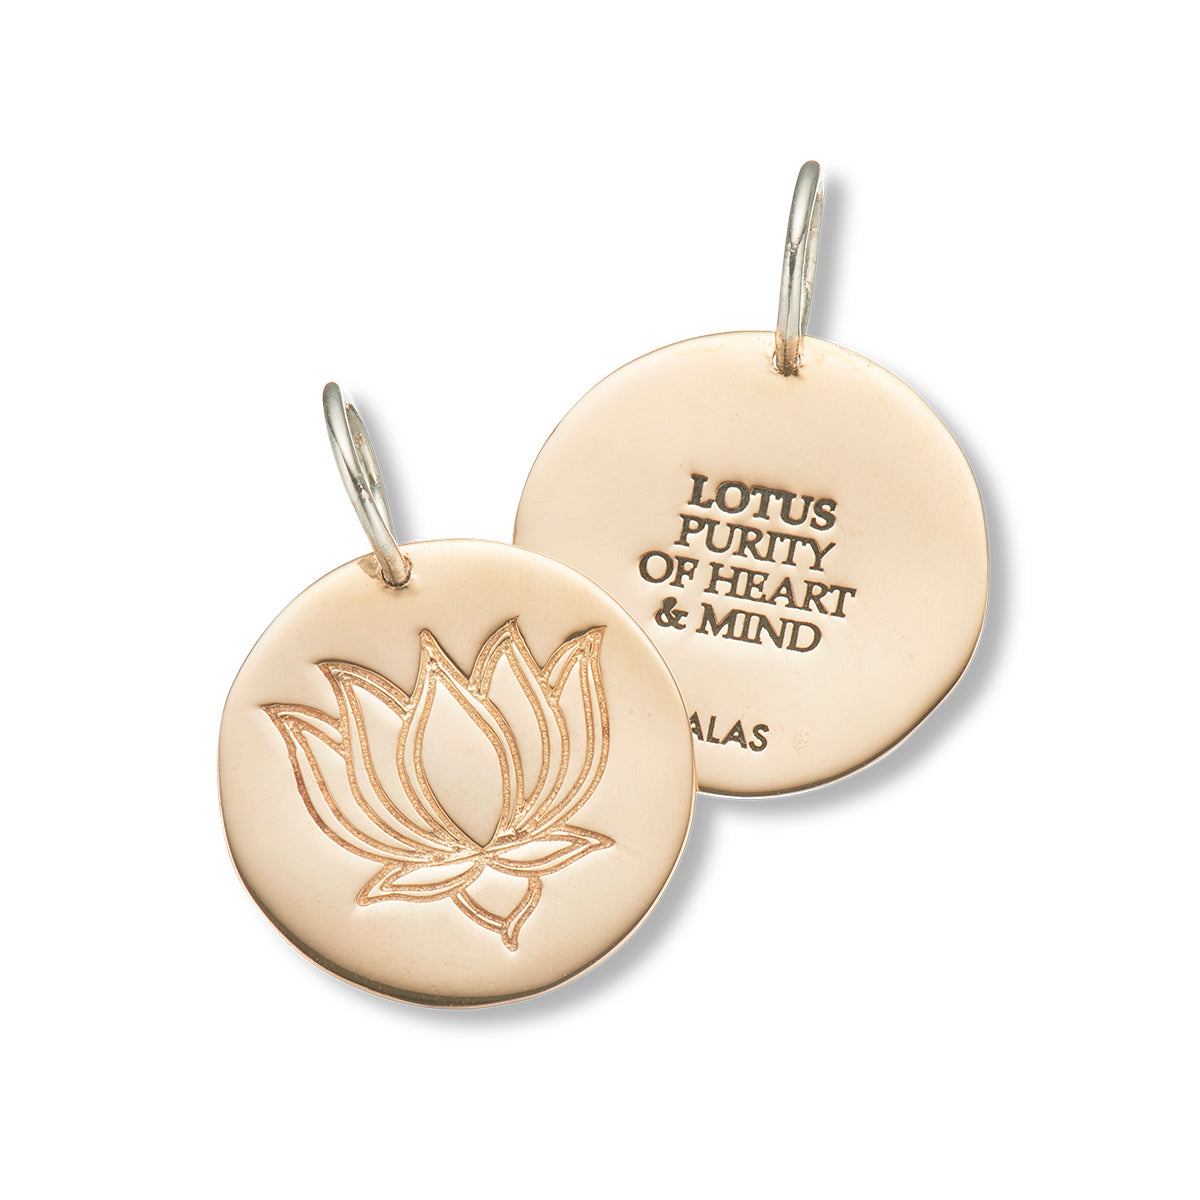 Lotus purity of heart and mind charm